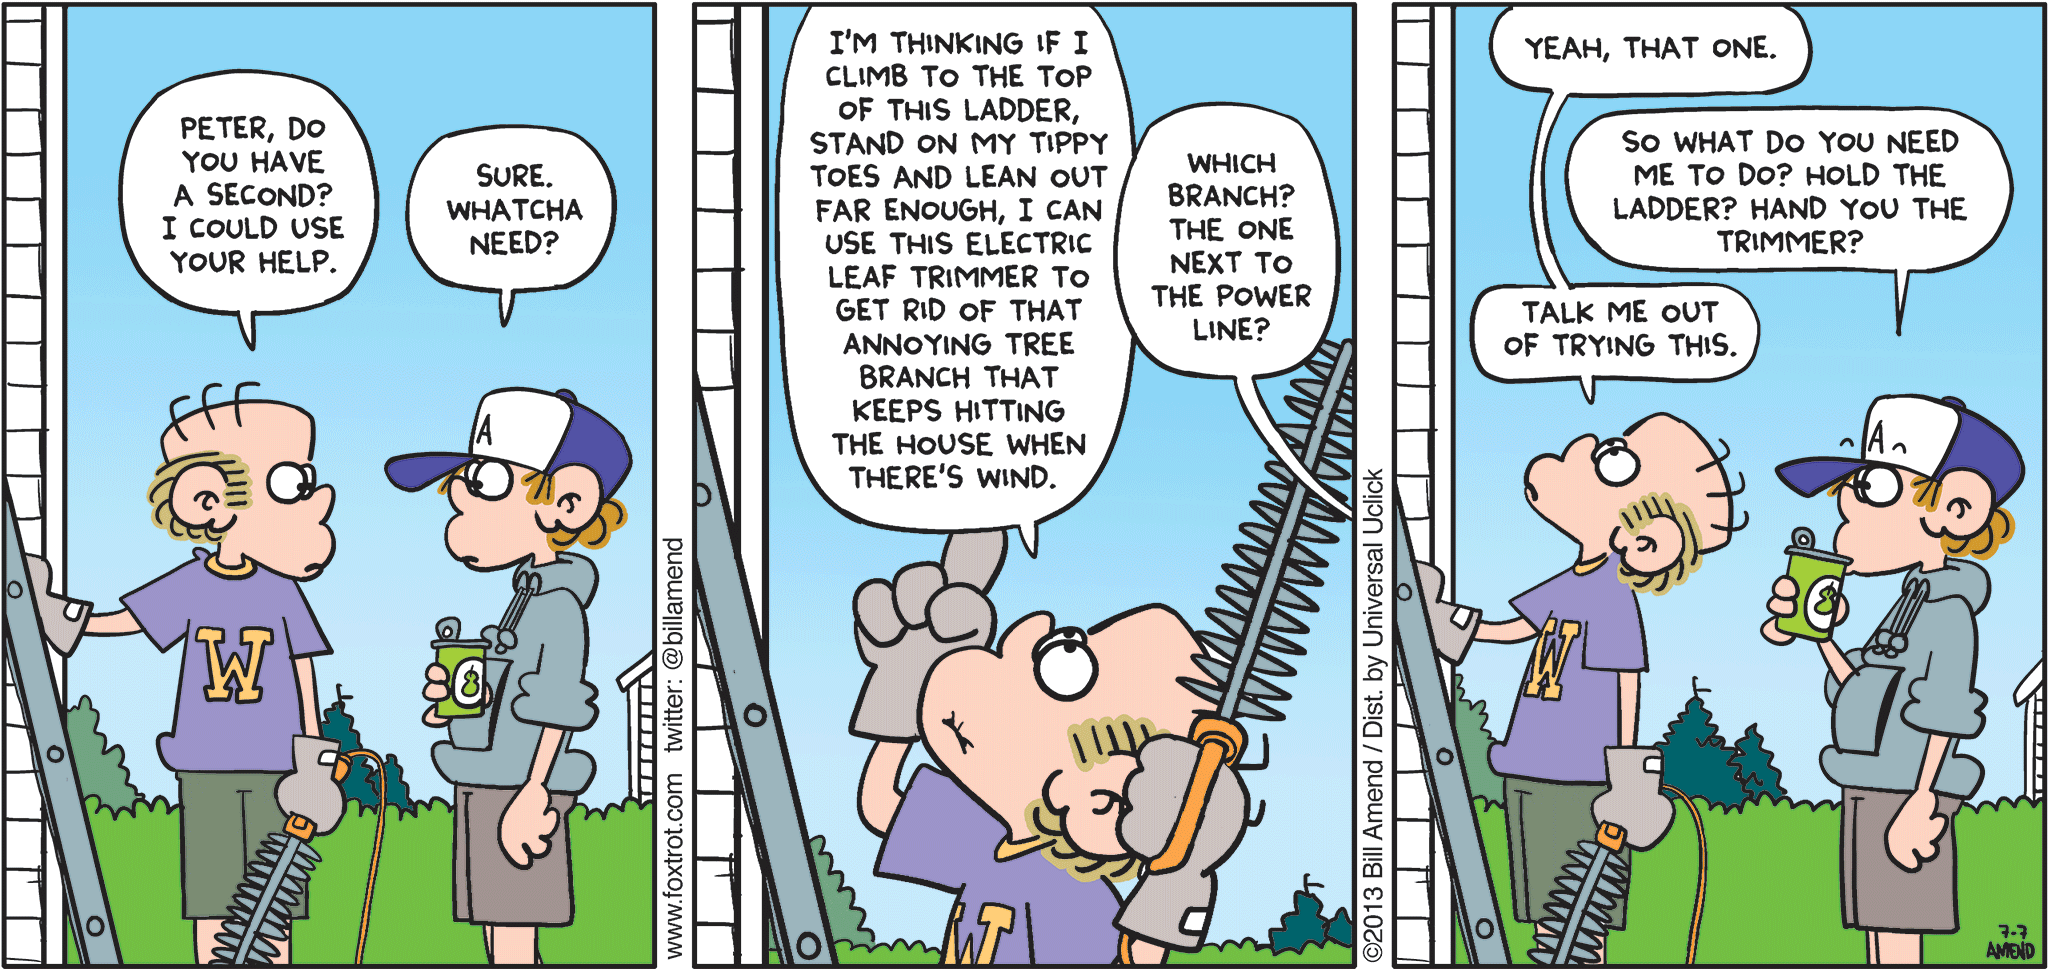 FoxTrot by Bill Amend - "I’m Counting On You, Son" published July 7, 2013 - Roger: Peter, do you have a second? I could use your help. Peter: Sure. Whatcha need? Roger: I'm thinking if I climb to the top of this ladder, stand on my tippy toes and lean out far enough, I can use this electric leaf trimmer to get rid of that annoying tree branch that keeps hitting the house when there's wind. Peter: Which branch? The one next to the power line? Roger: Yeah, that one. Peter: So what do you need me to do? Hold the ladder? Hand you the trimmer? Roger: Talk me out of trying this.